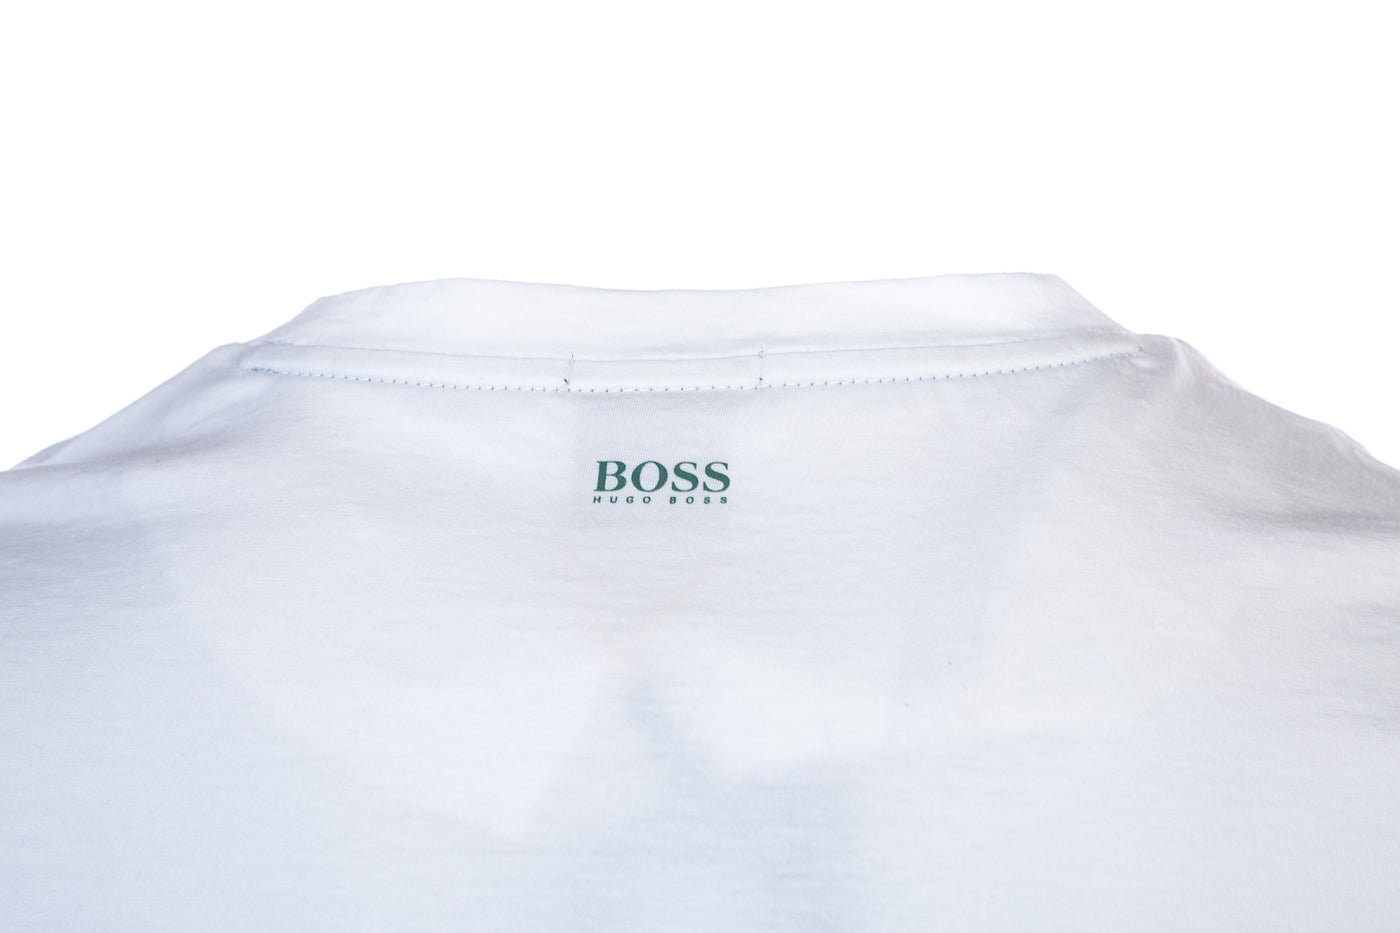 BOSS Tejungle 1 T Shirt in White